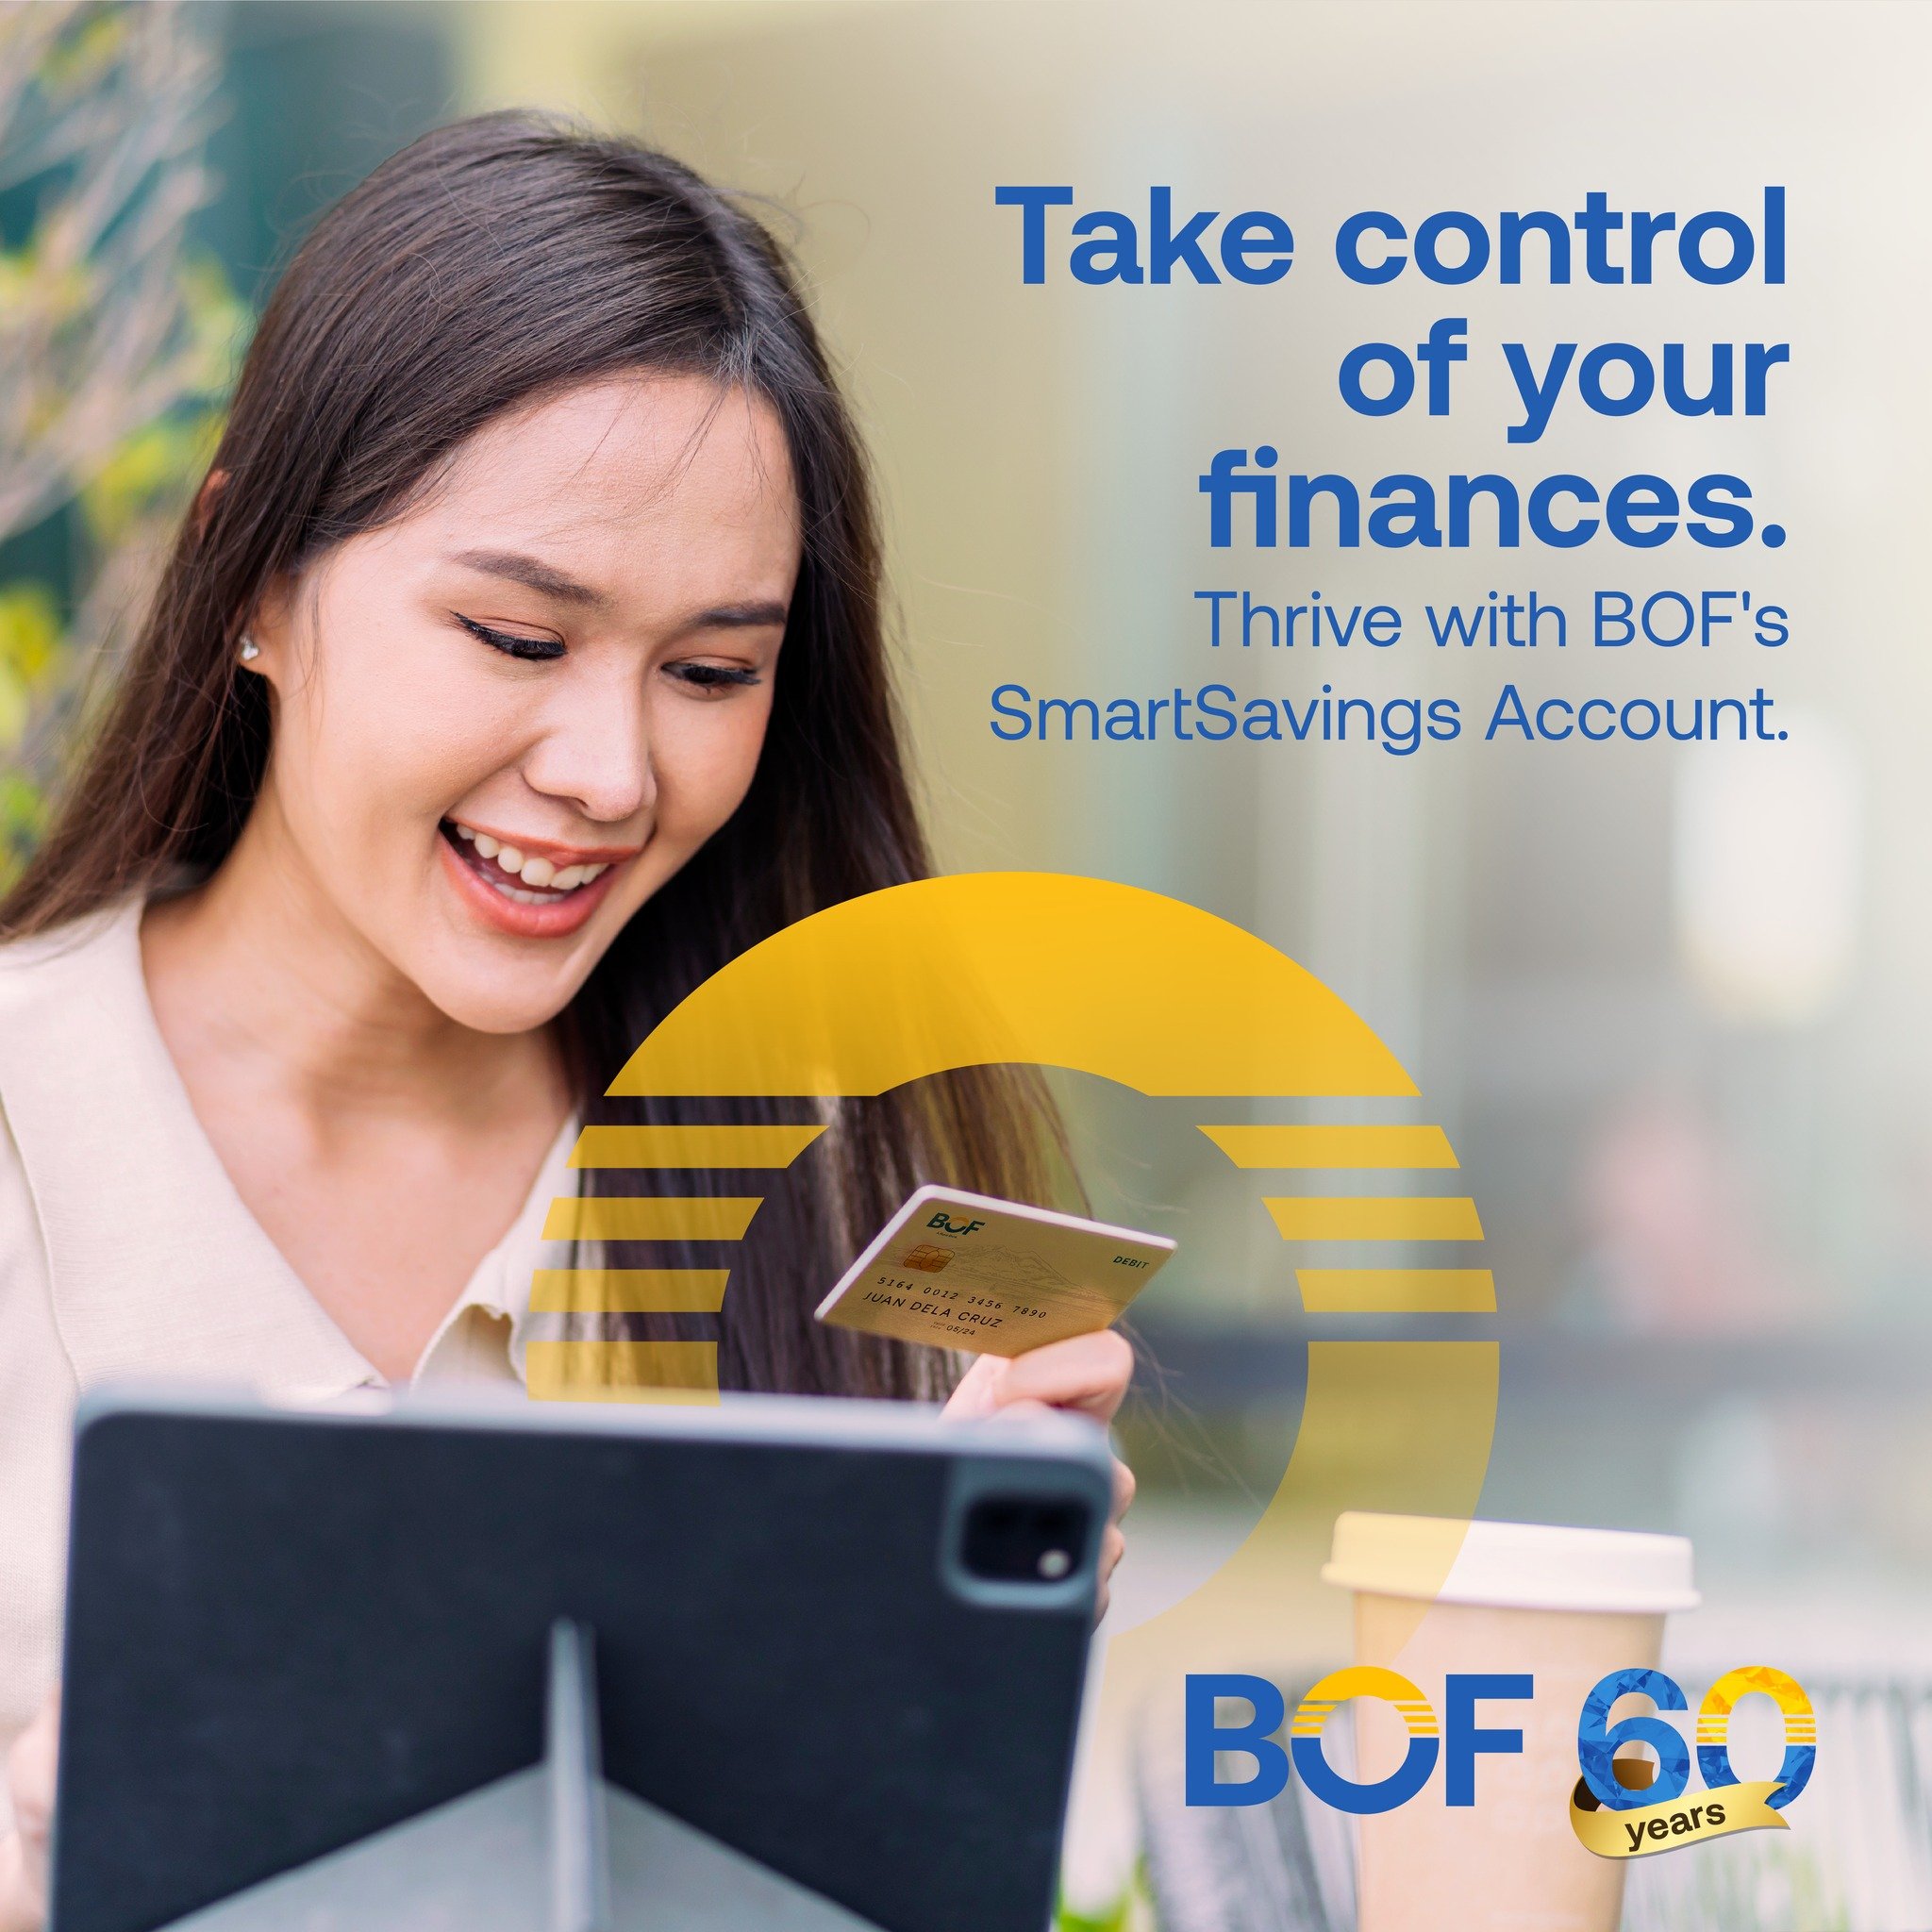 Ready to take charge of your financial future? Introducing BOF's SmartSavings Account &ndash; your key to financial empowerment and growth. Open an account now!

Visit our website to know more.
https://www.bof.com.ph/smartsavings

#BOF

BOF, Inc. (A 